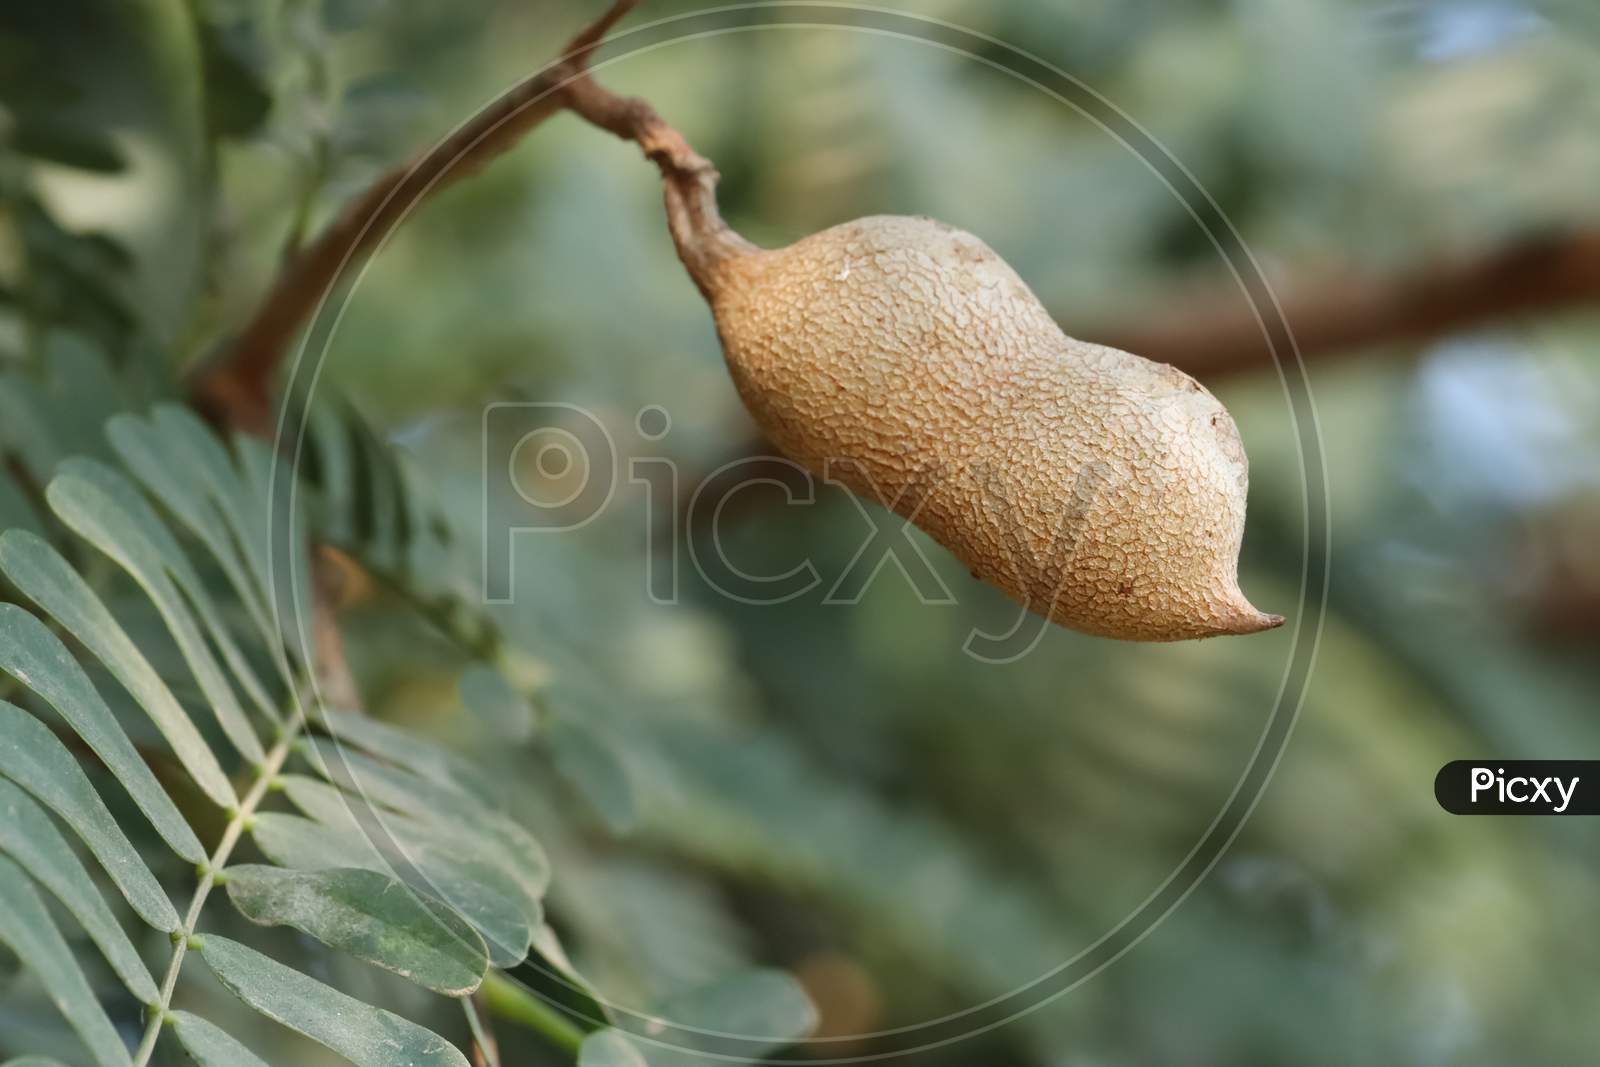 This is a fresh tamarind on the tree